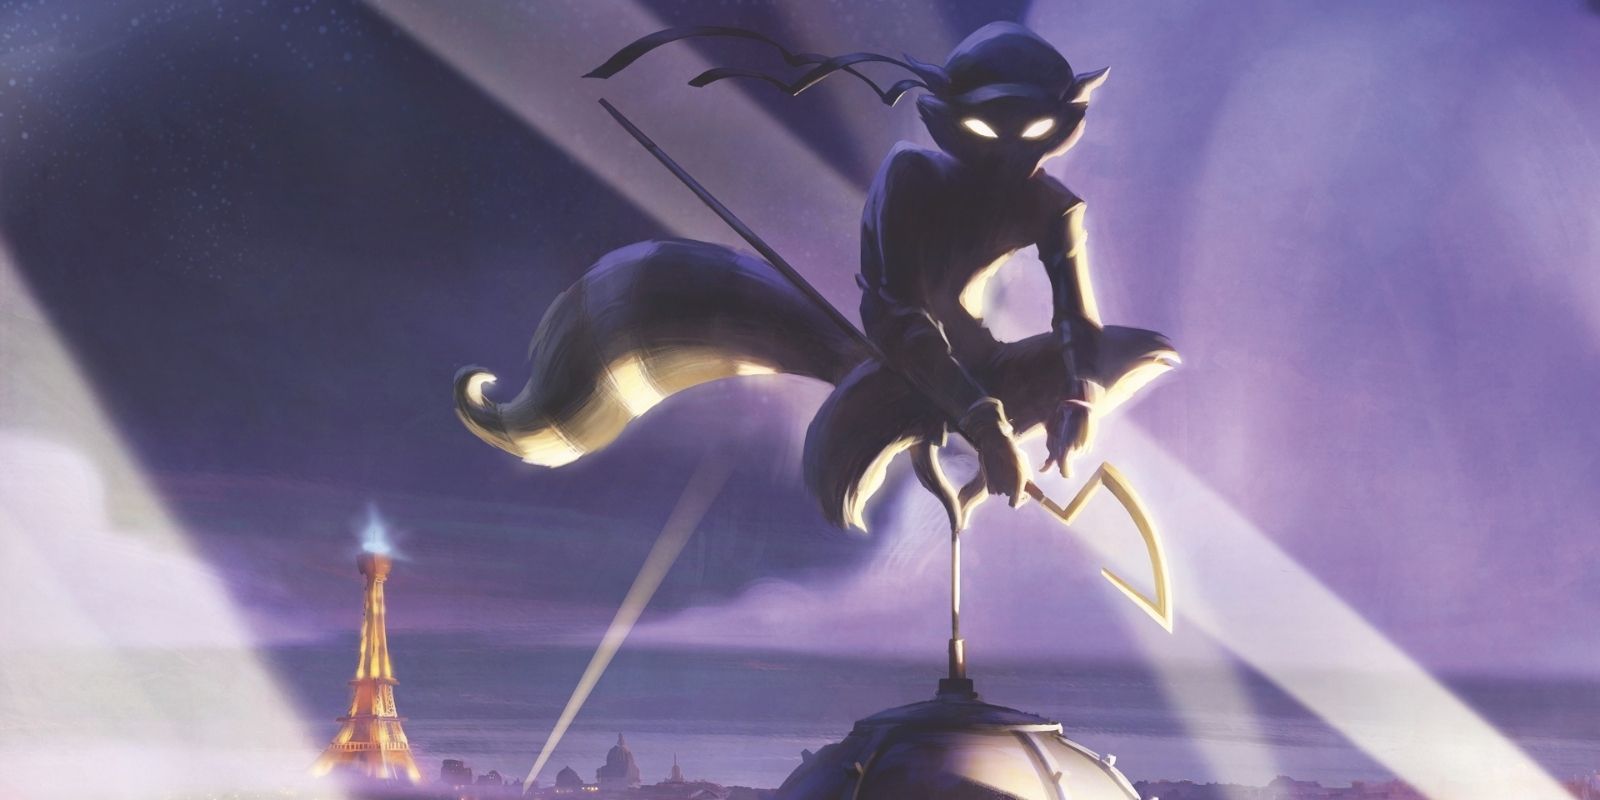 Sly Cooper sitting on a spire, surrounded by spotlights